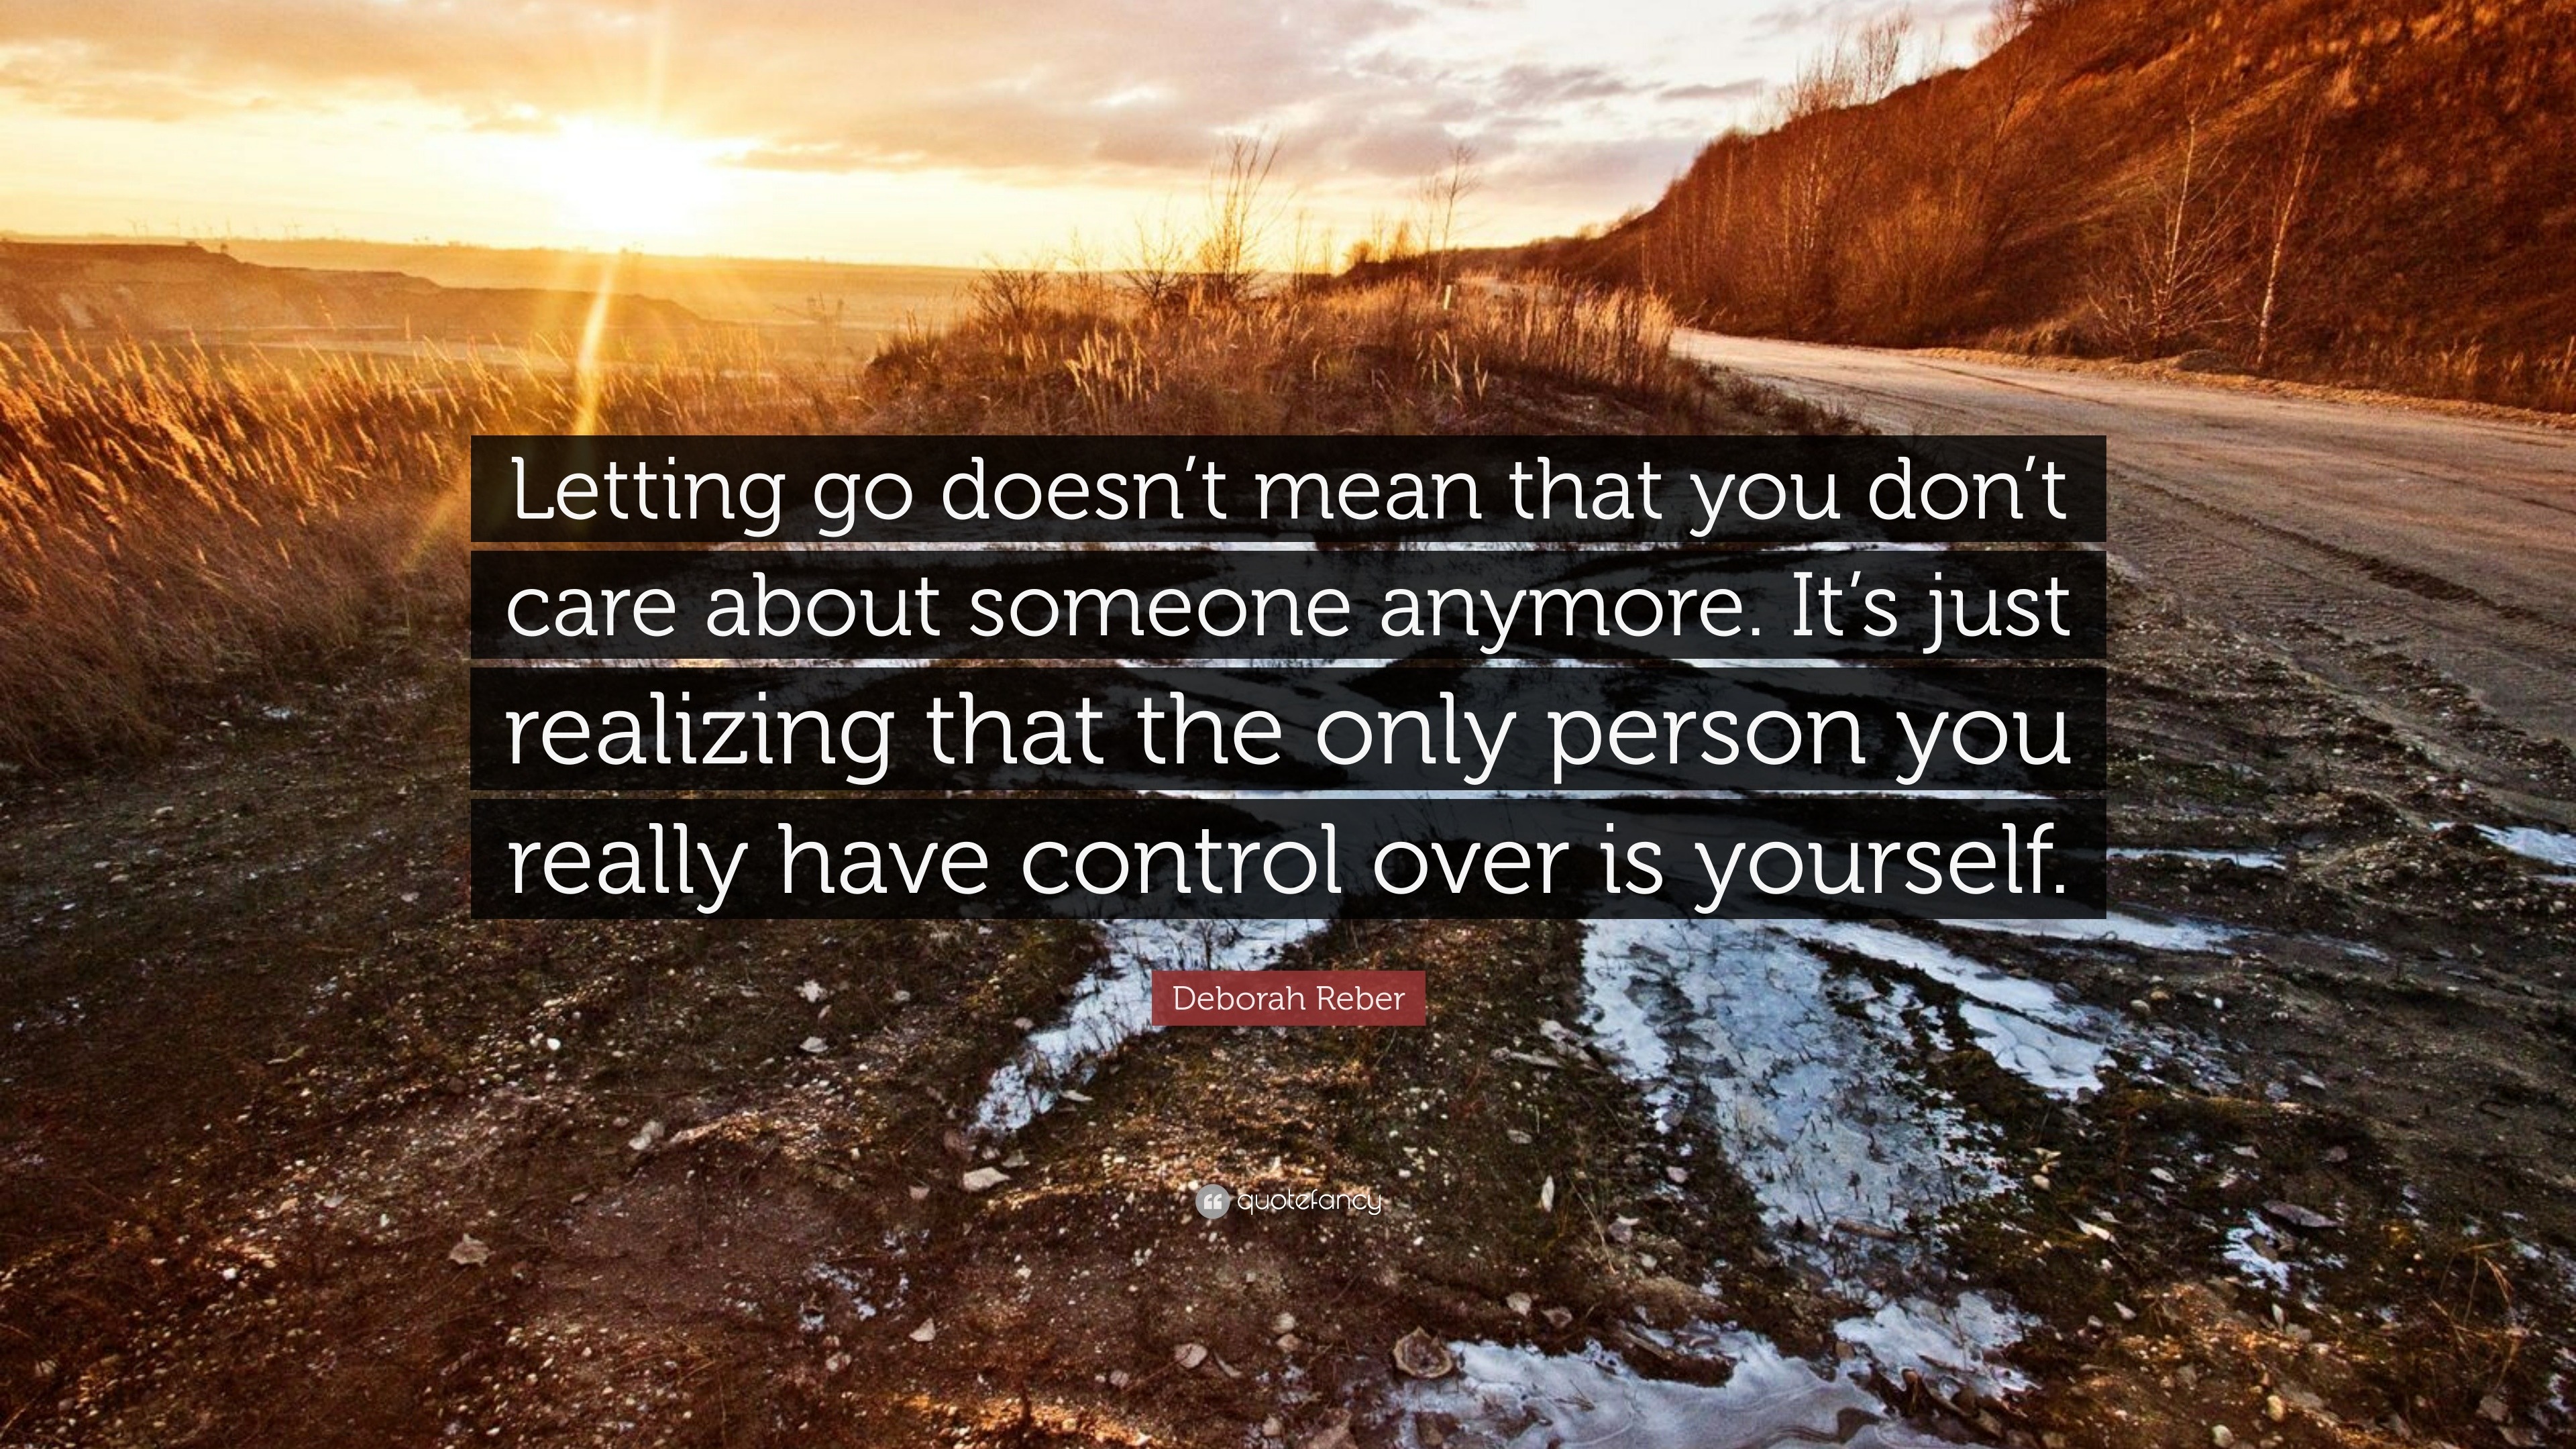 Deborah Reber Quote “Letting go doesn t mean that you don t